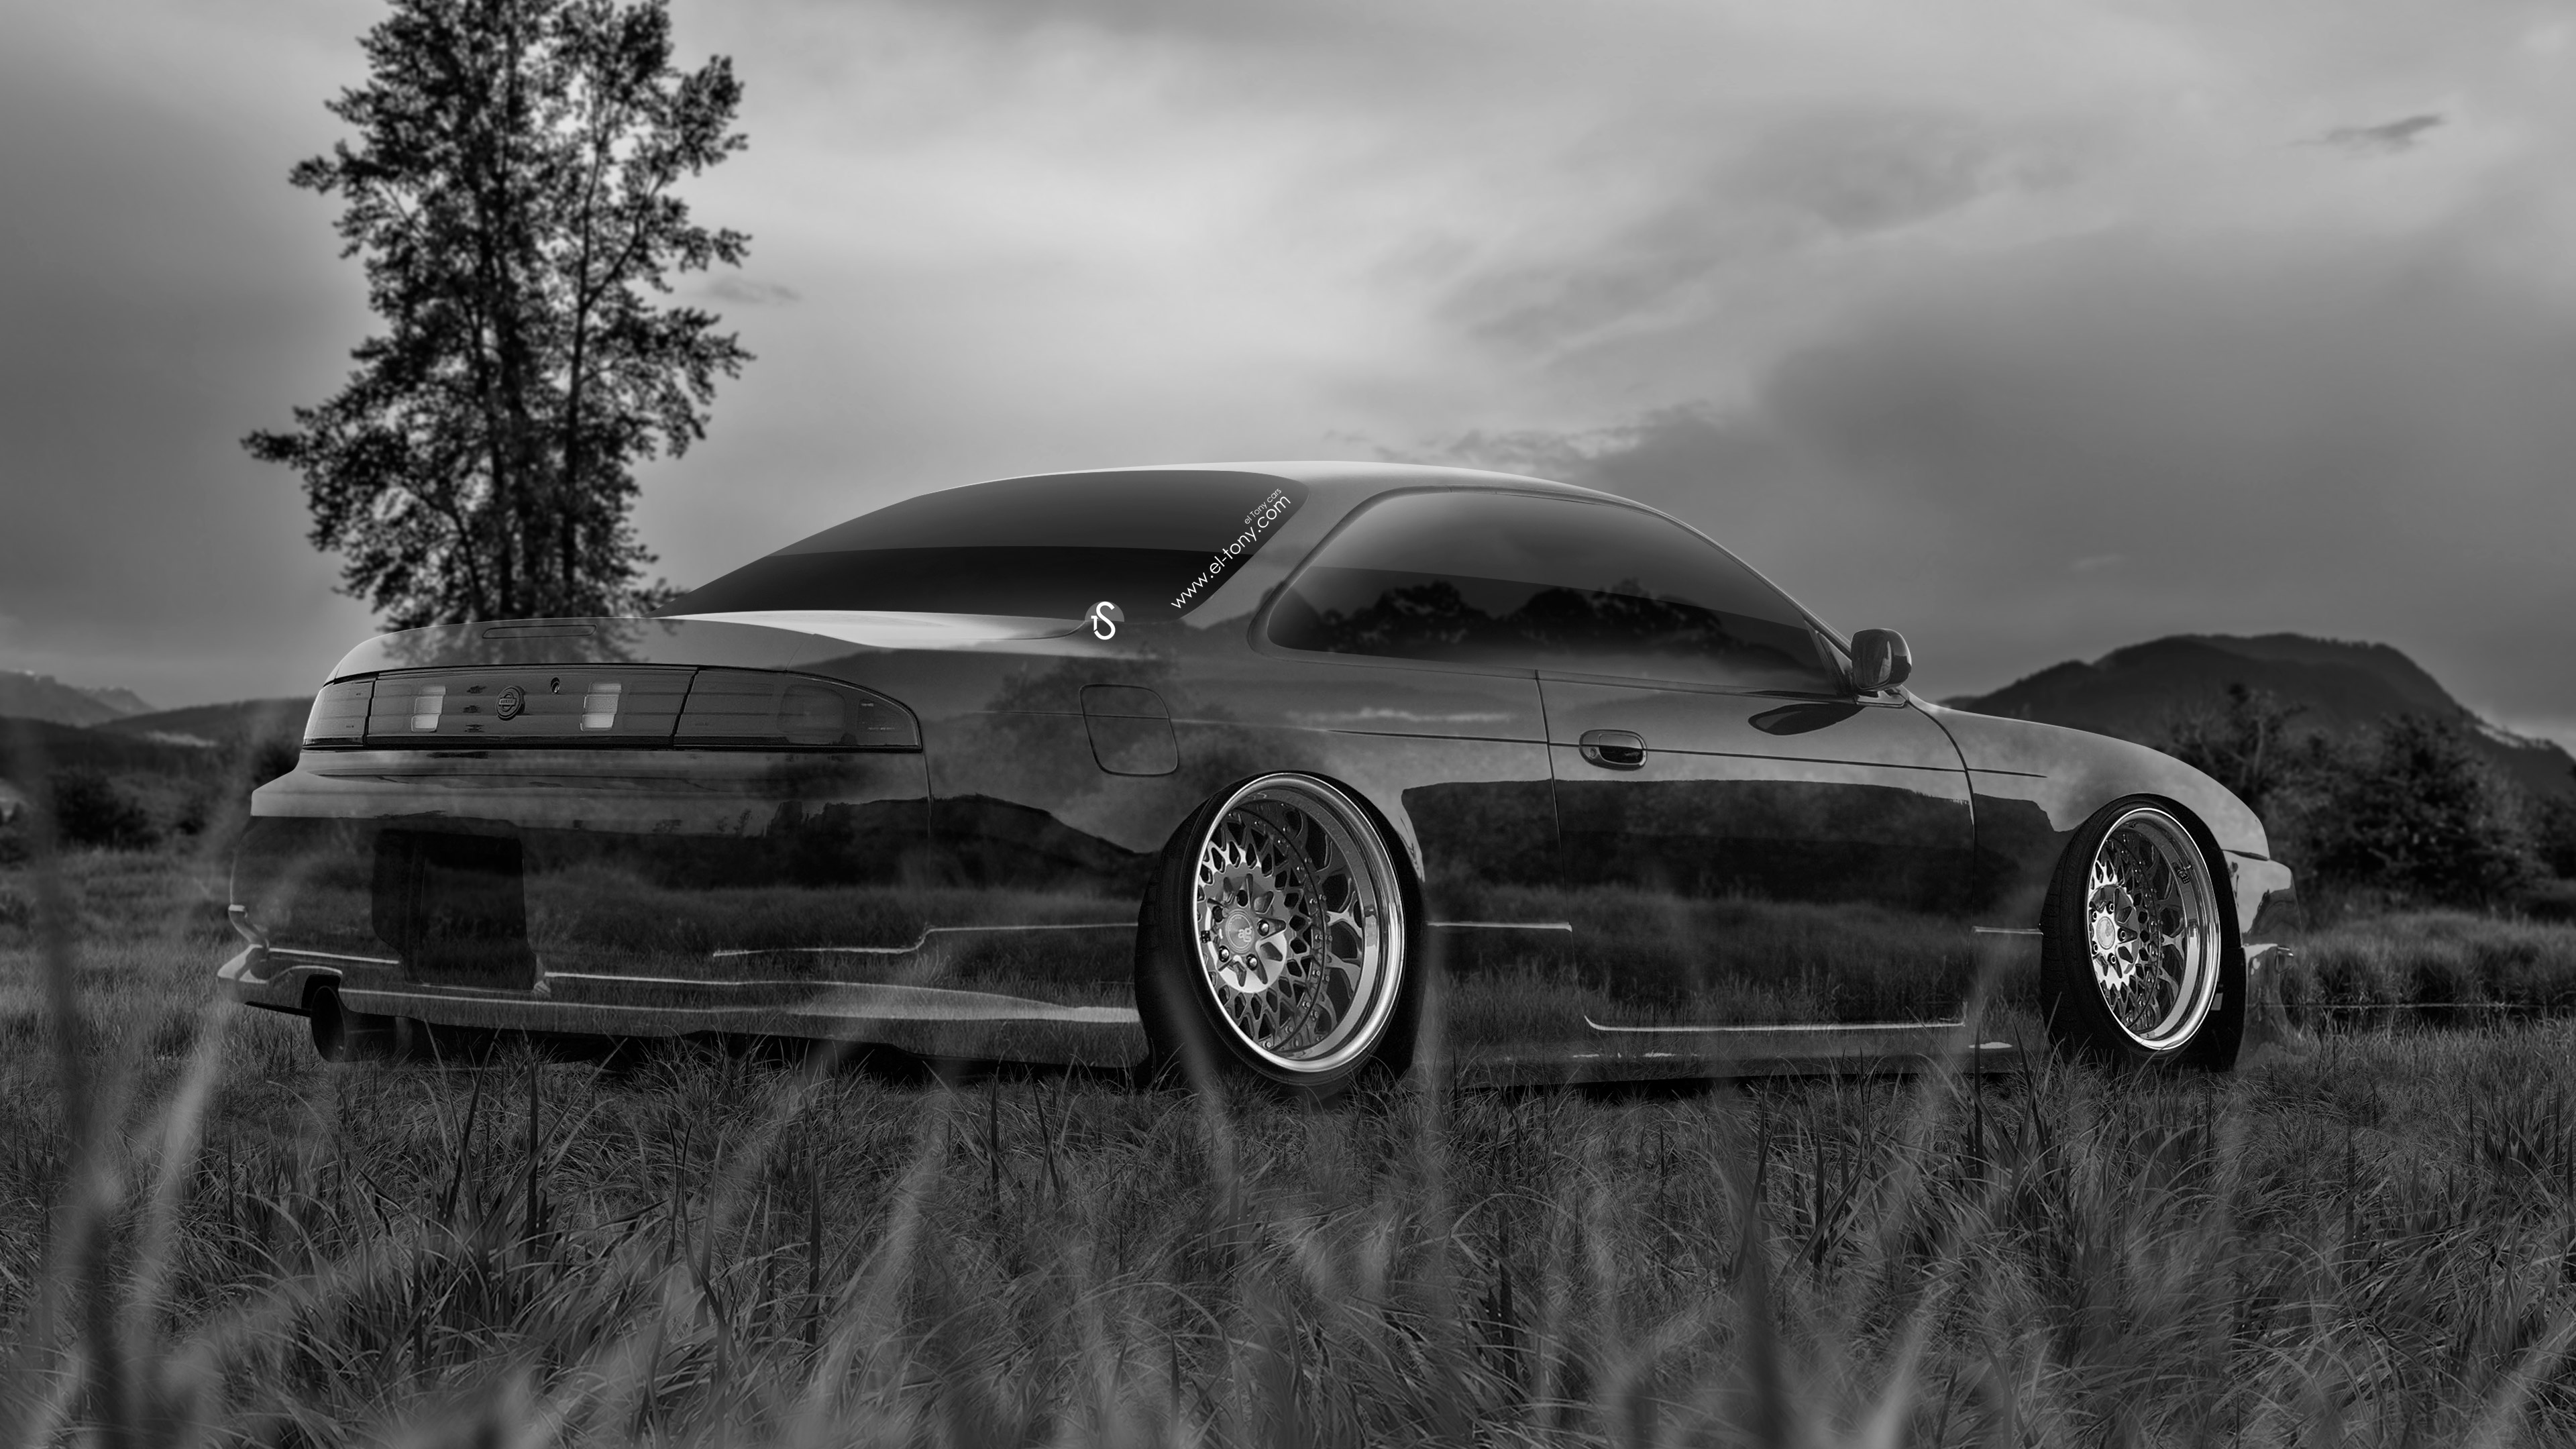 Images Of Nissan Silvia S14 Wallpaper - Nissan Silvia S14 Black And White , HD Wallpaper & Backgrounds